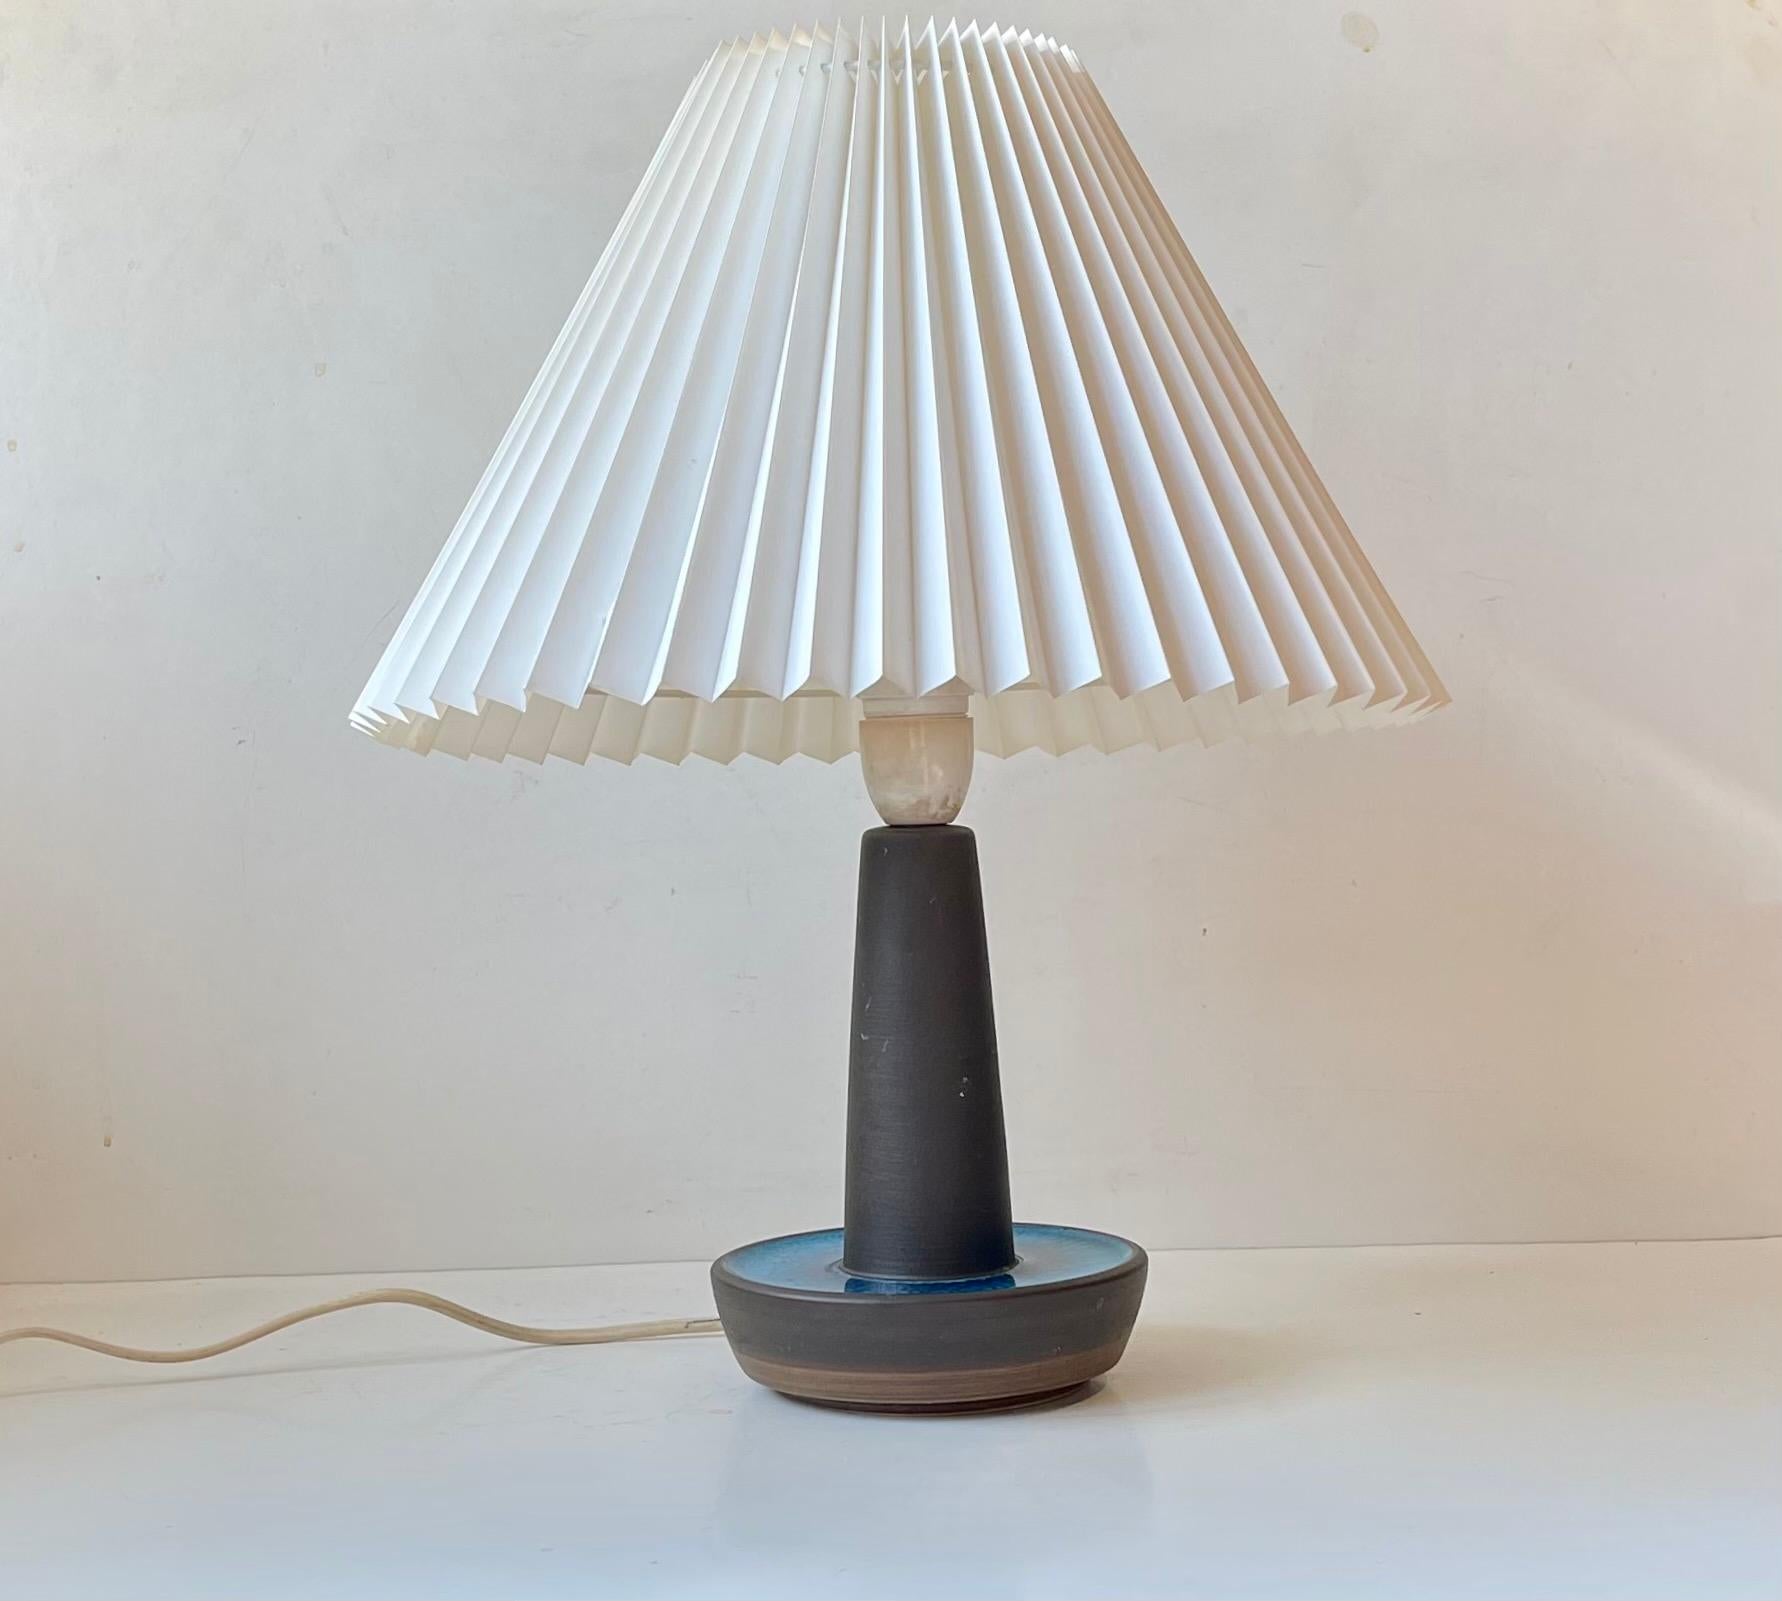 Scandinavian Modern Table Lamp with Turquoise Glaze by Einar Johansen, Søholm, 1960s For Sale